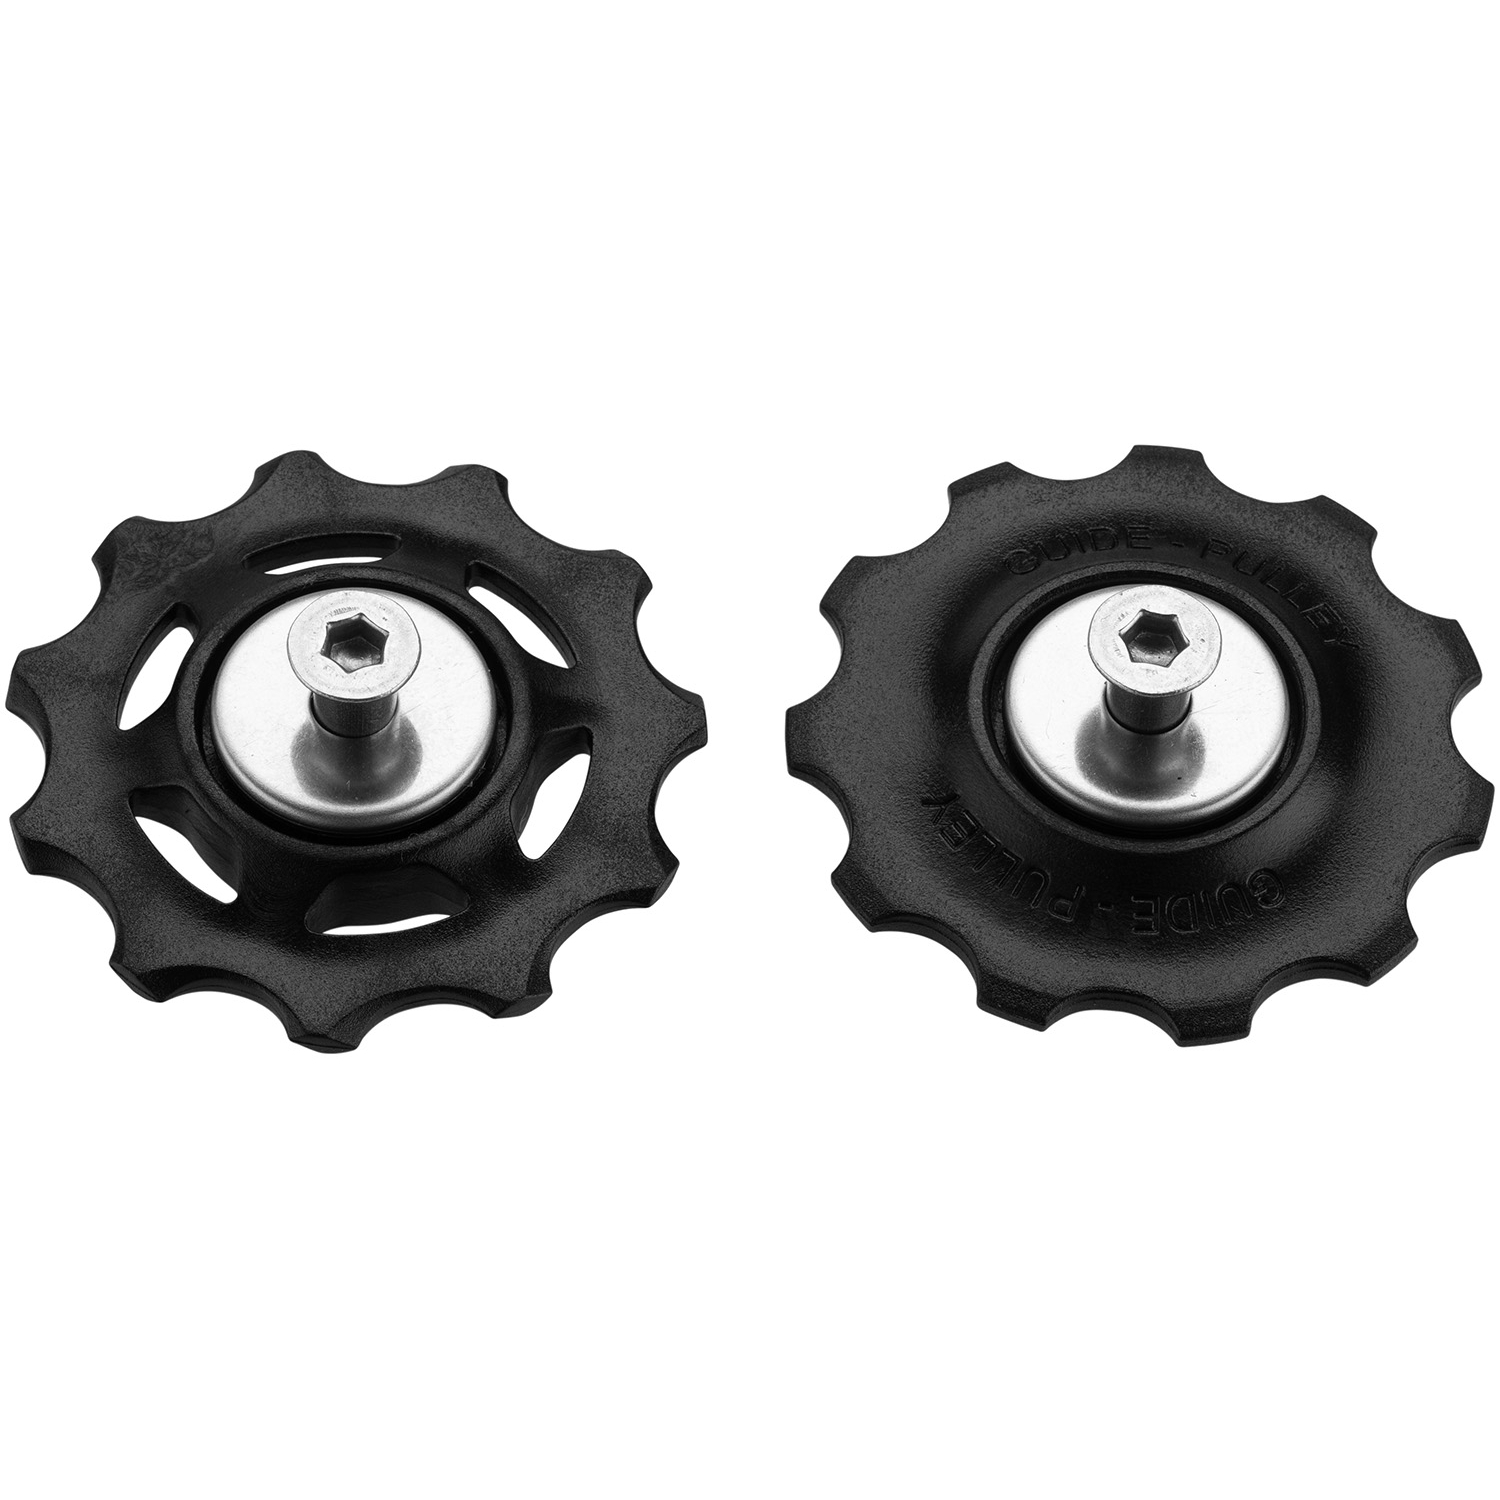 Picture of microSHIFT Rear Derailleur Pulley Kit | Non-Clutch